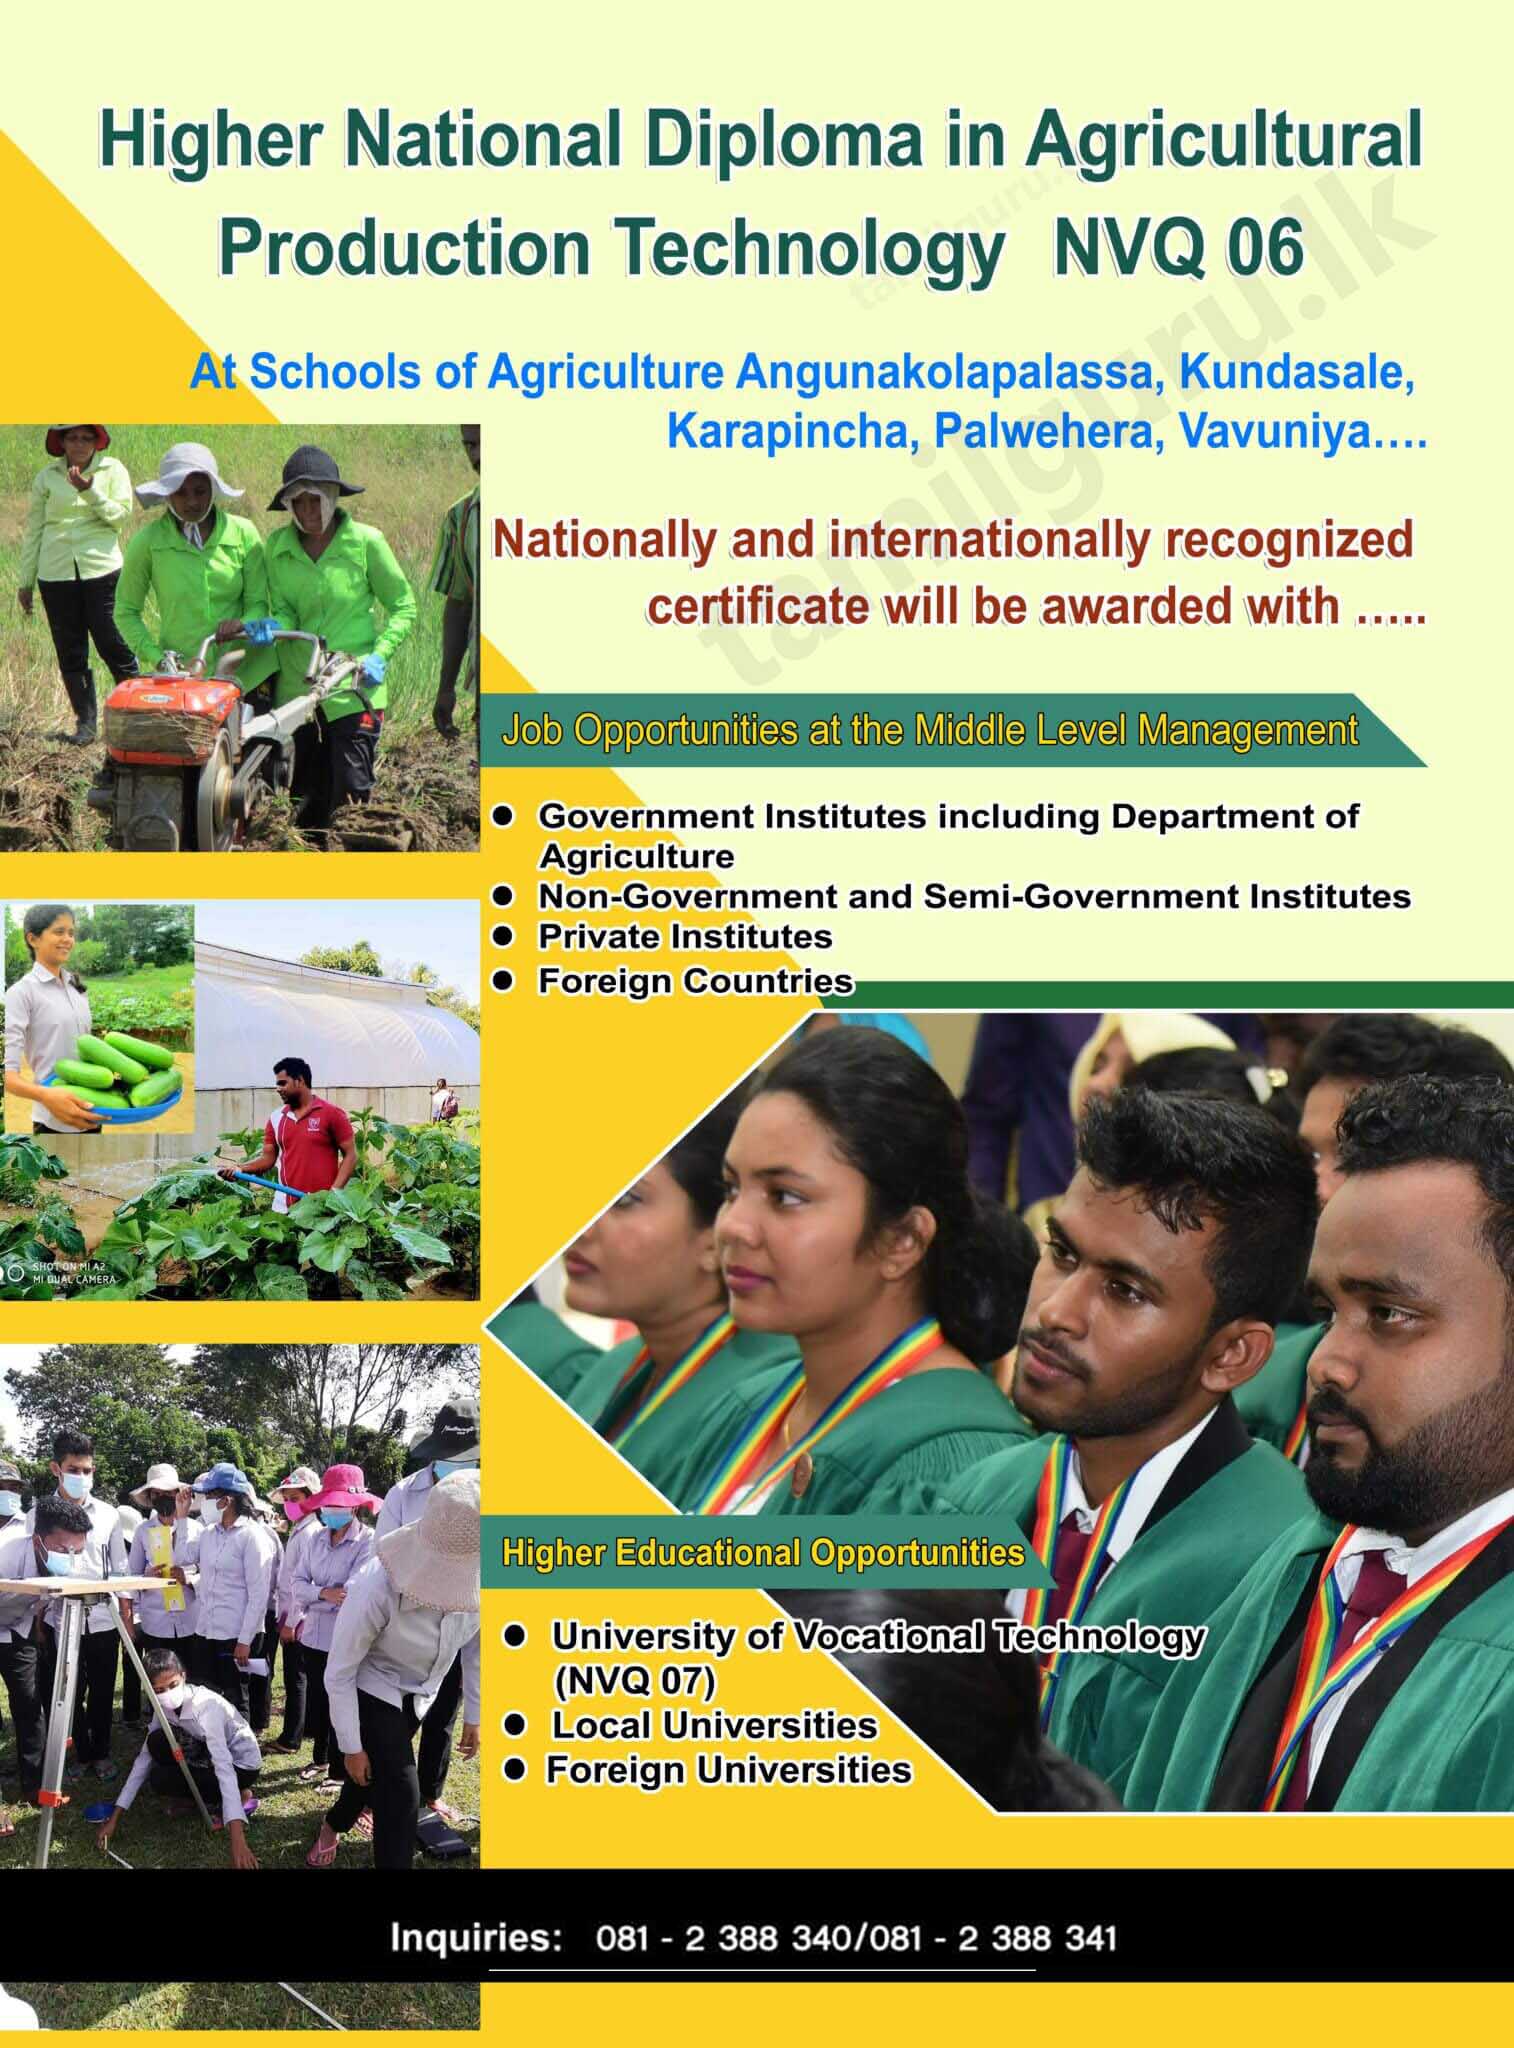 Schools of Agriculture - Higher National Diploma in Agricultural Production Technology (NVQ 06)